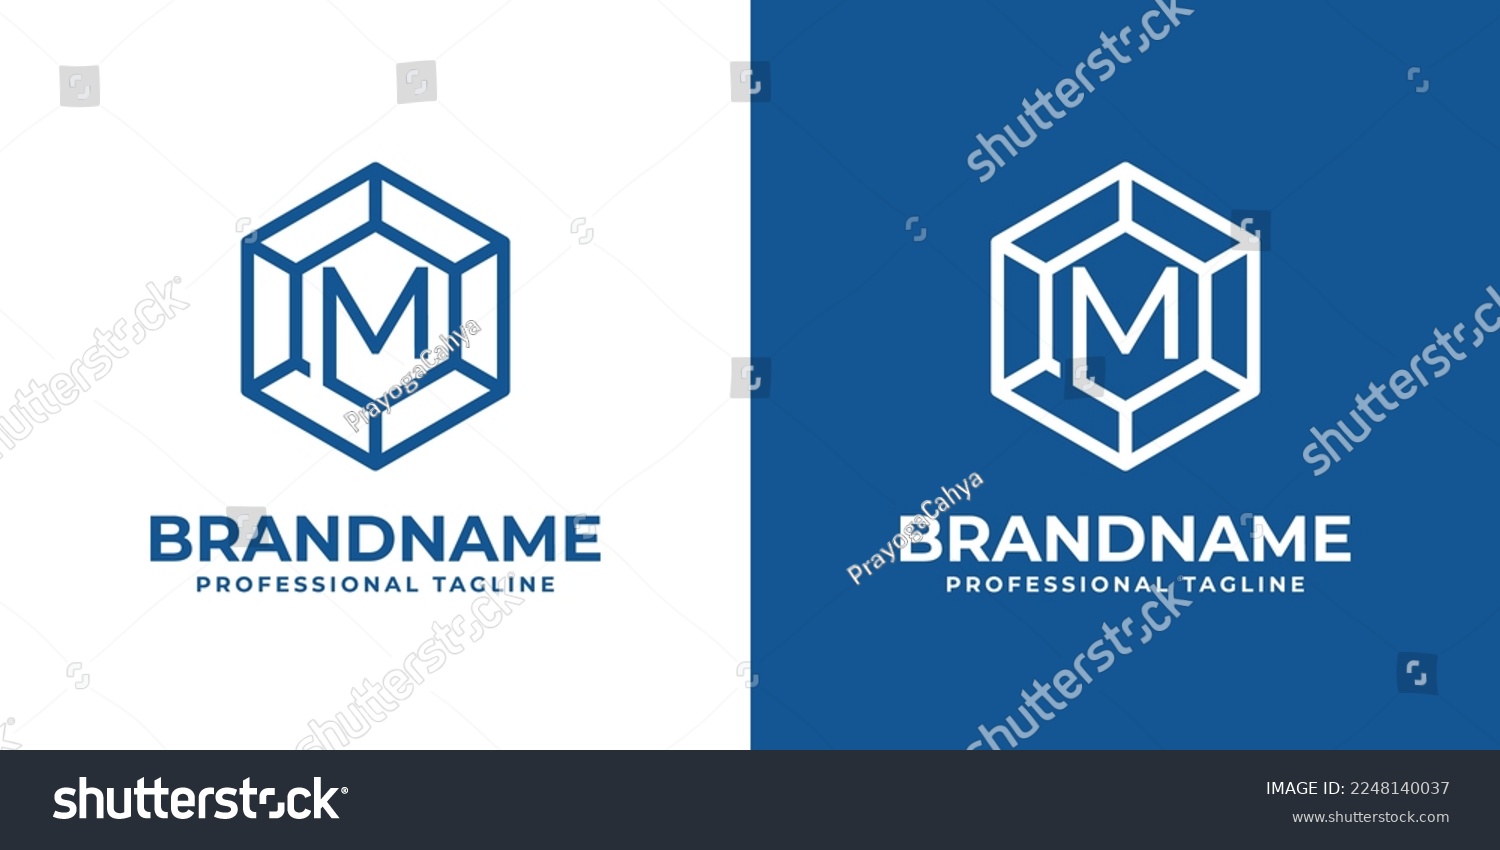 SVG of Initial M Hexagon Diamond Logo, suitable for any business with M initial. svg